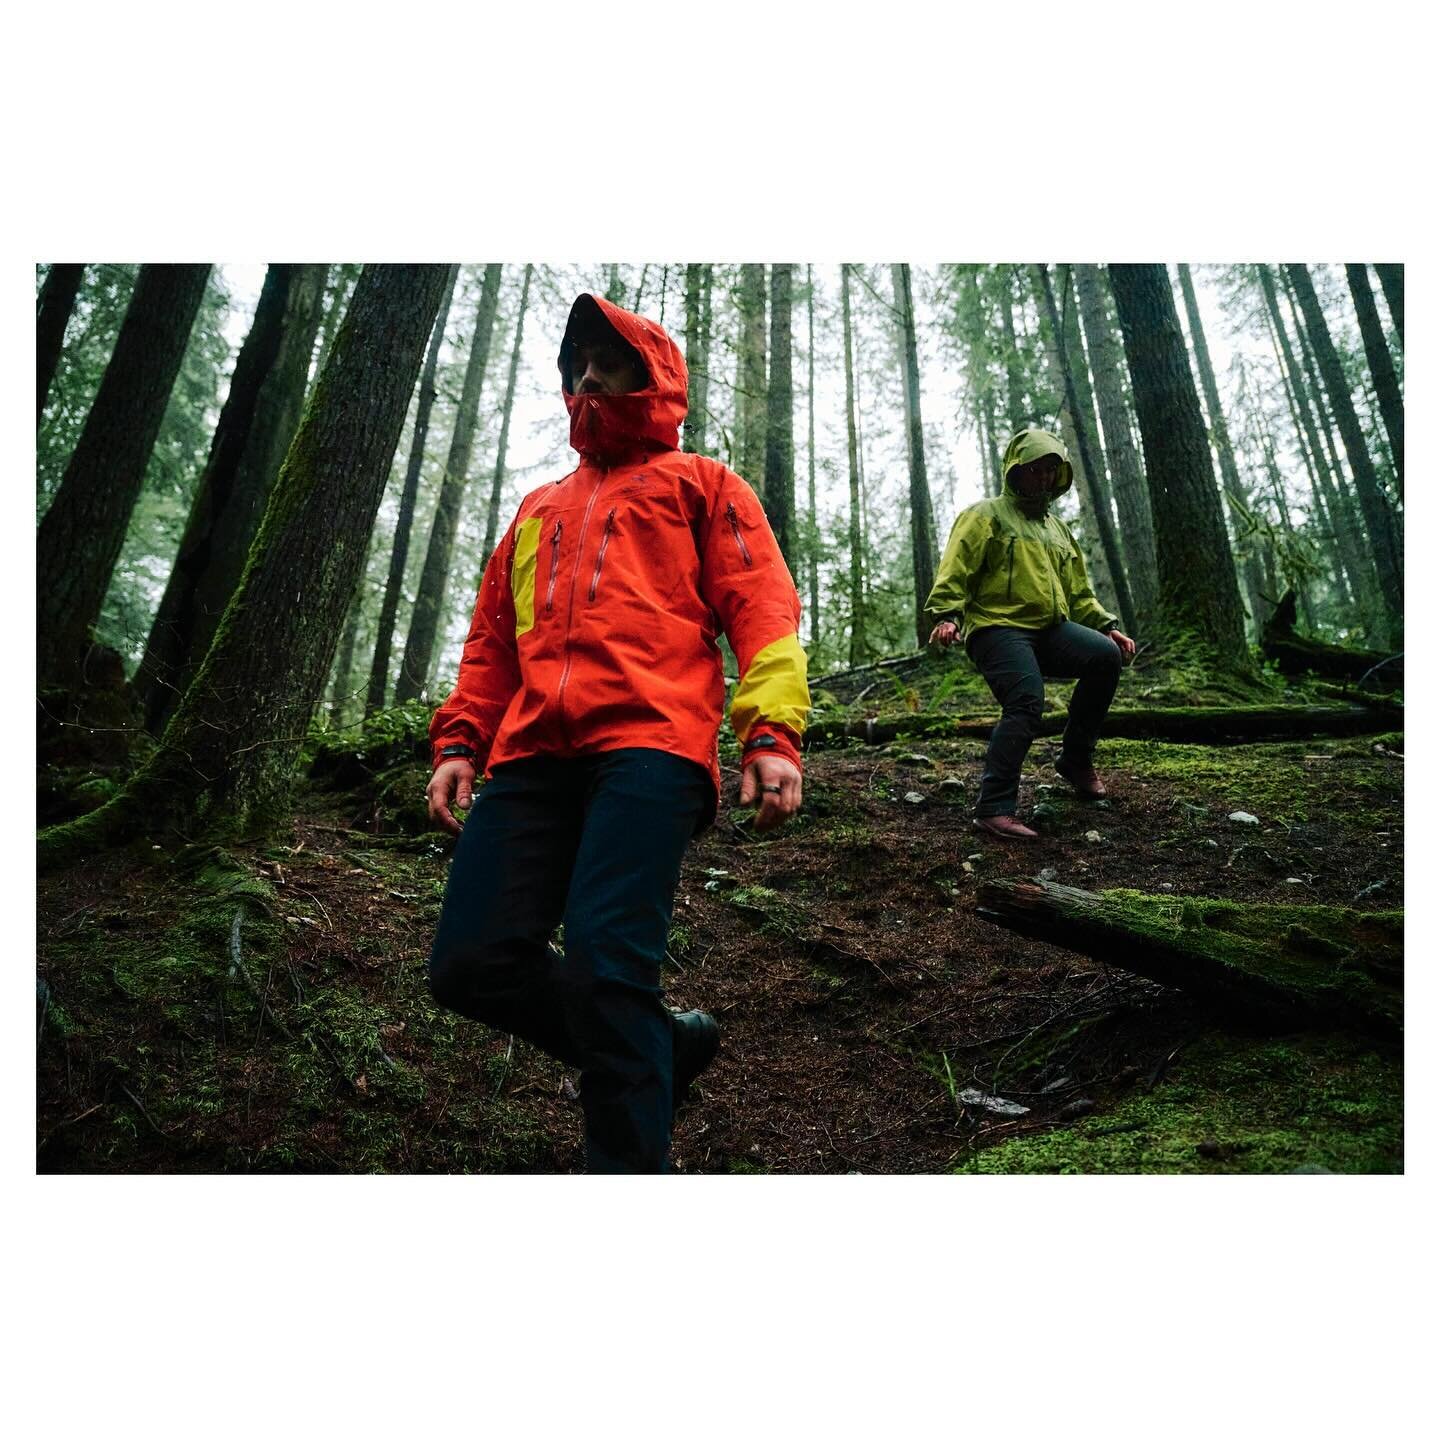 2/3 Stoked to share new work for @arcteryx Rebird! Couldn&rsquo;t have done it without the A+ team that made shooting in the pouring rain a great time @kirbysharp @brandemily @abbydells @justis thank you all!!